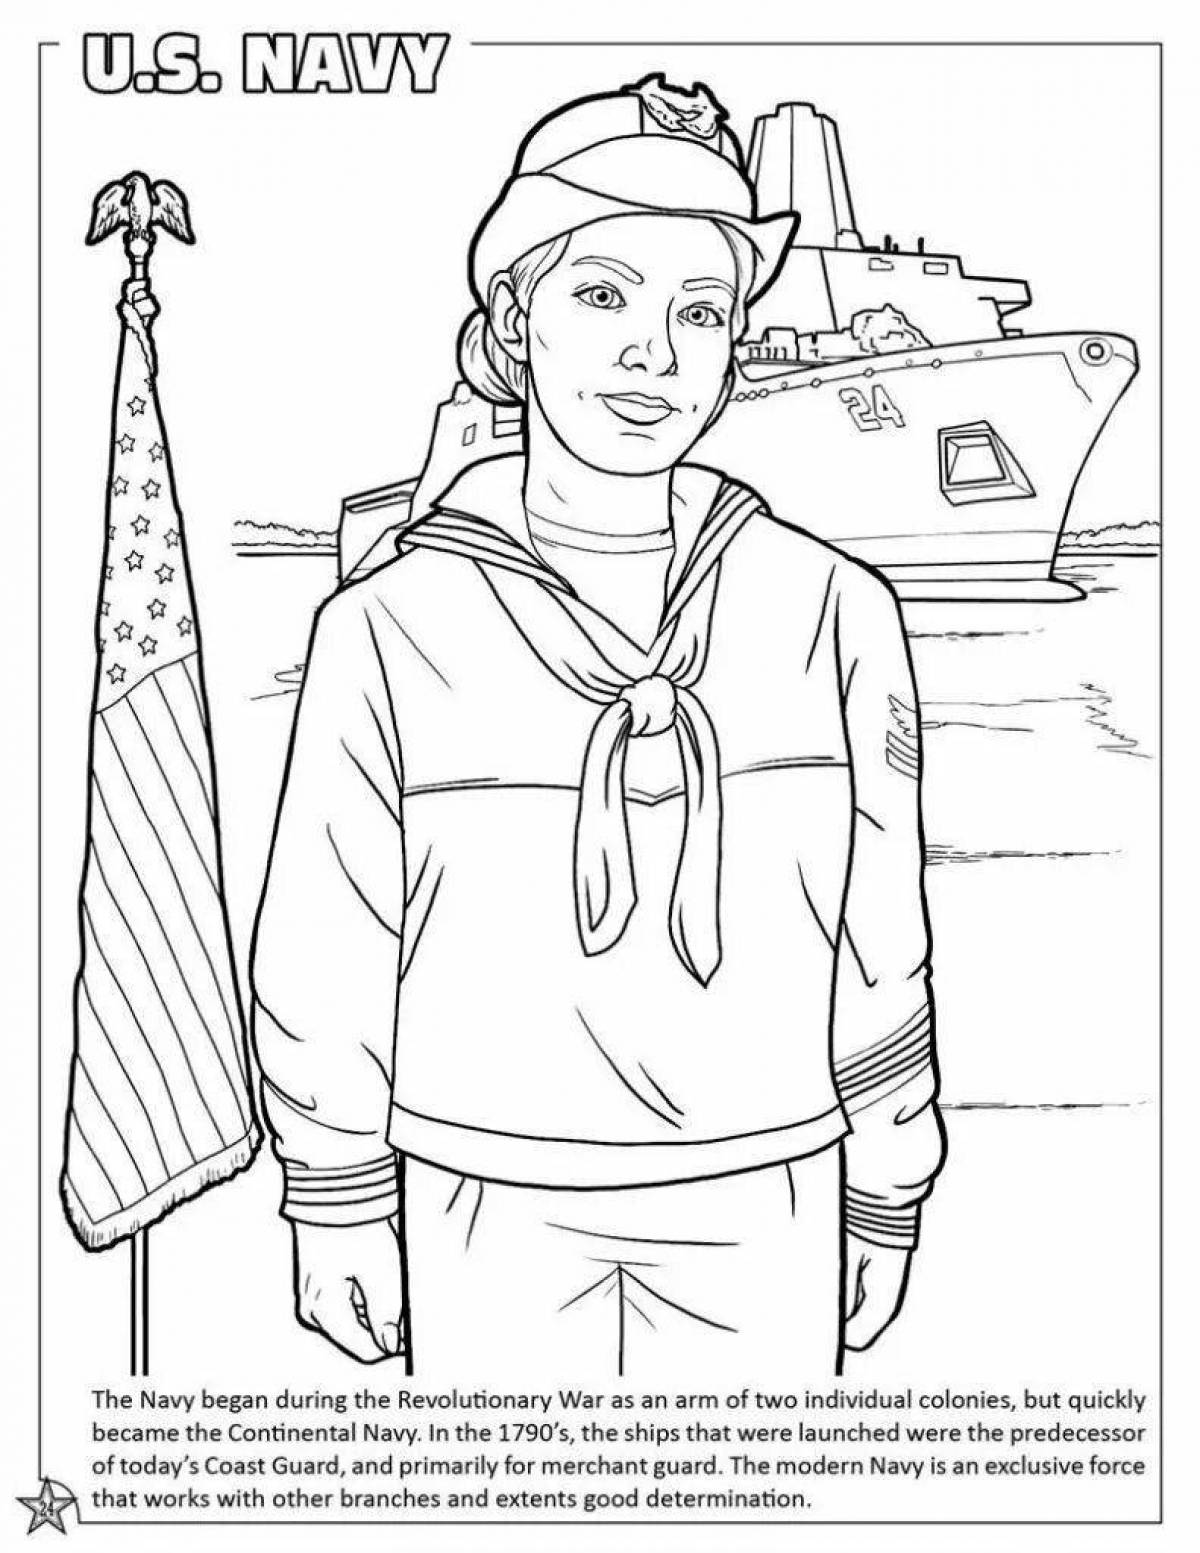 Attractive military profession coloring book for kids